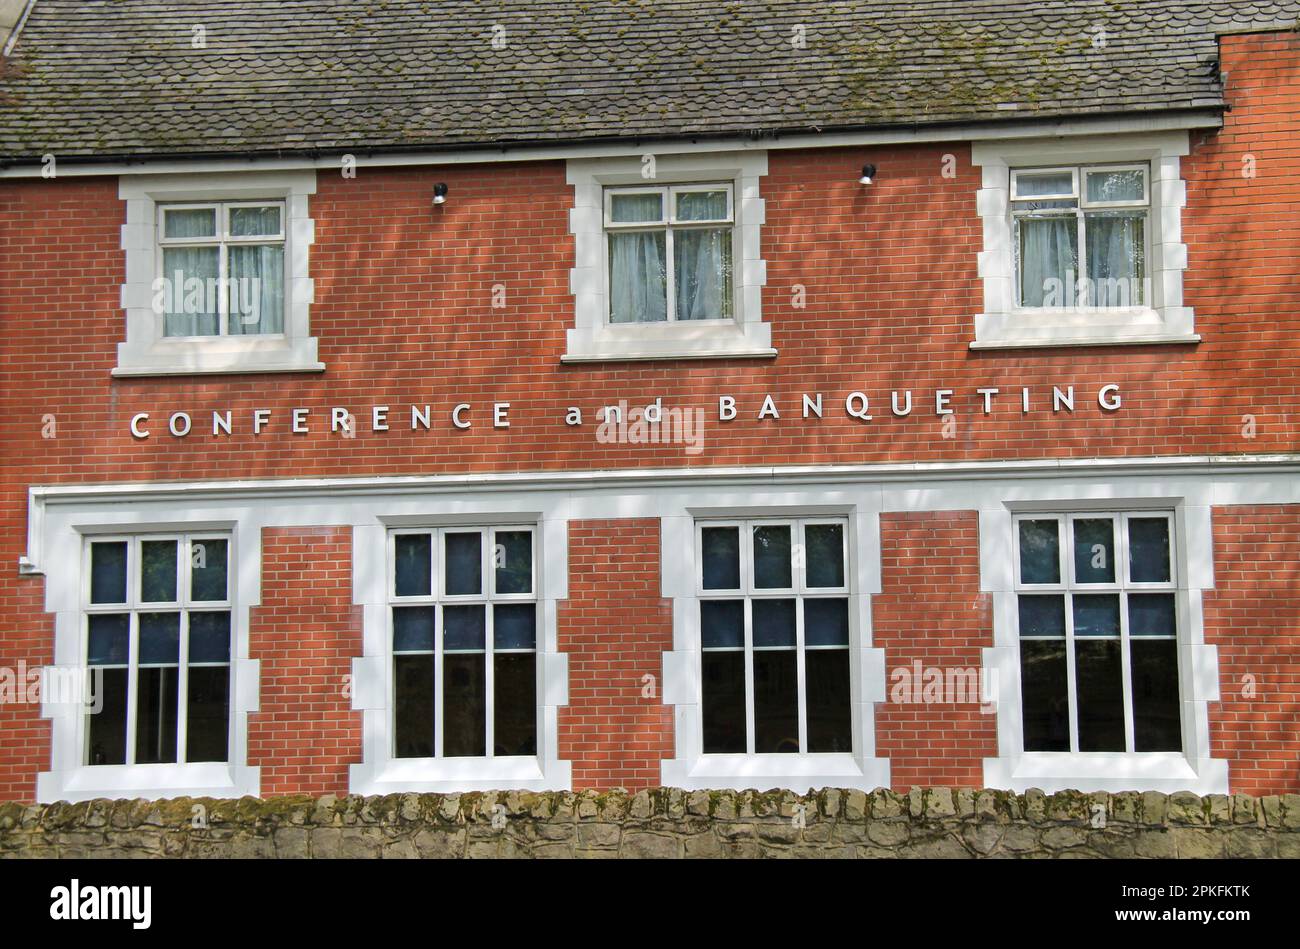 A Building Sign for a Conference and Banqueting Centre. Stock Photo